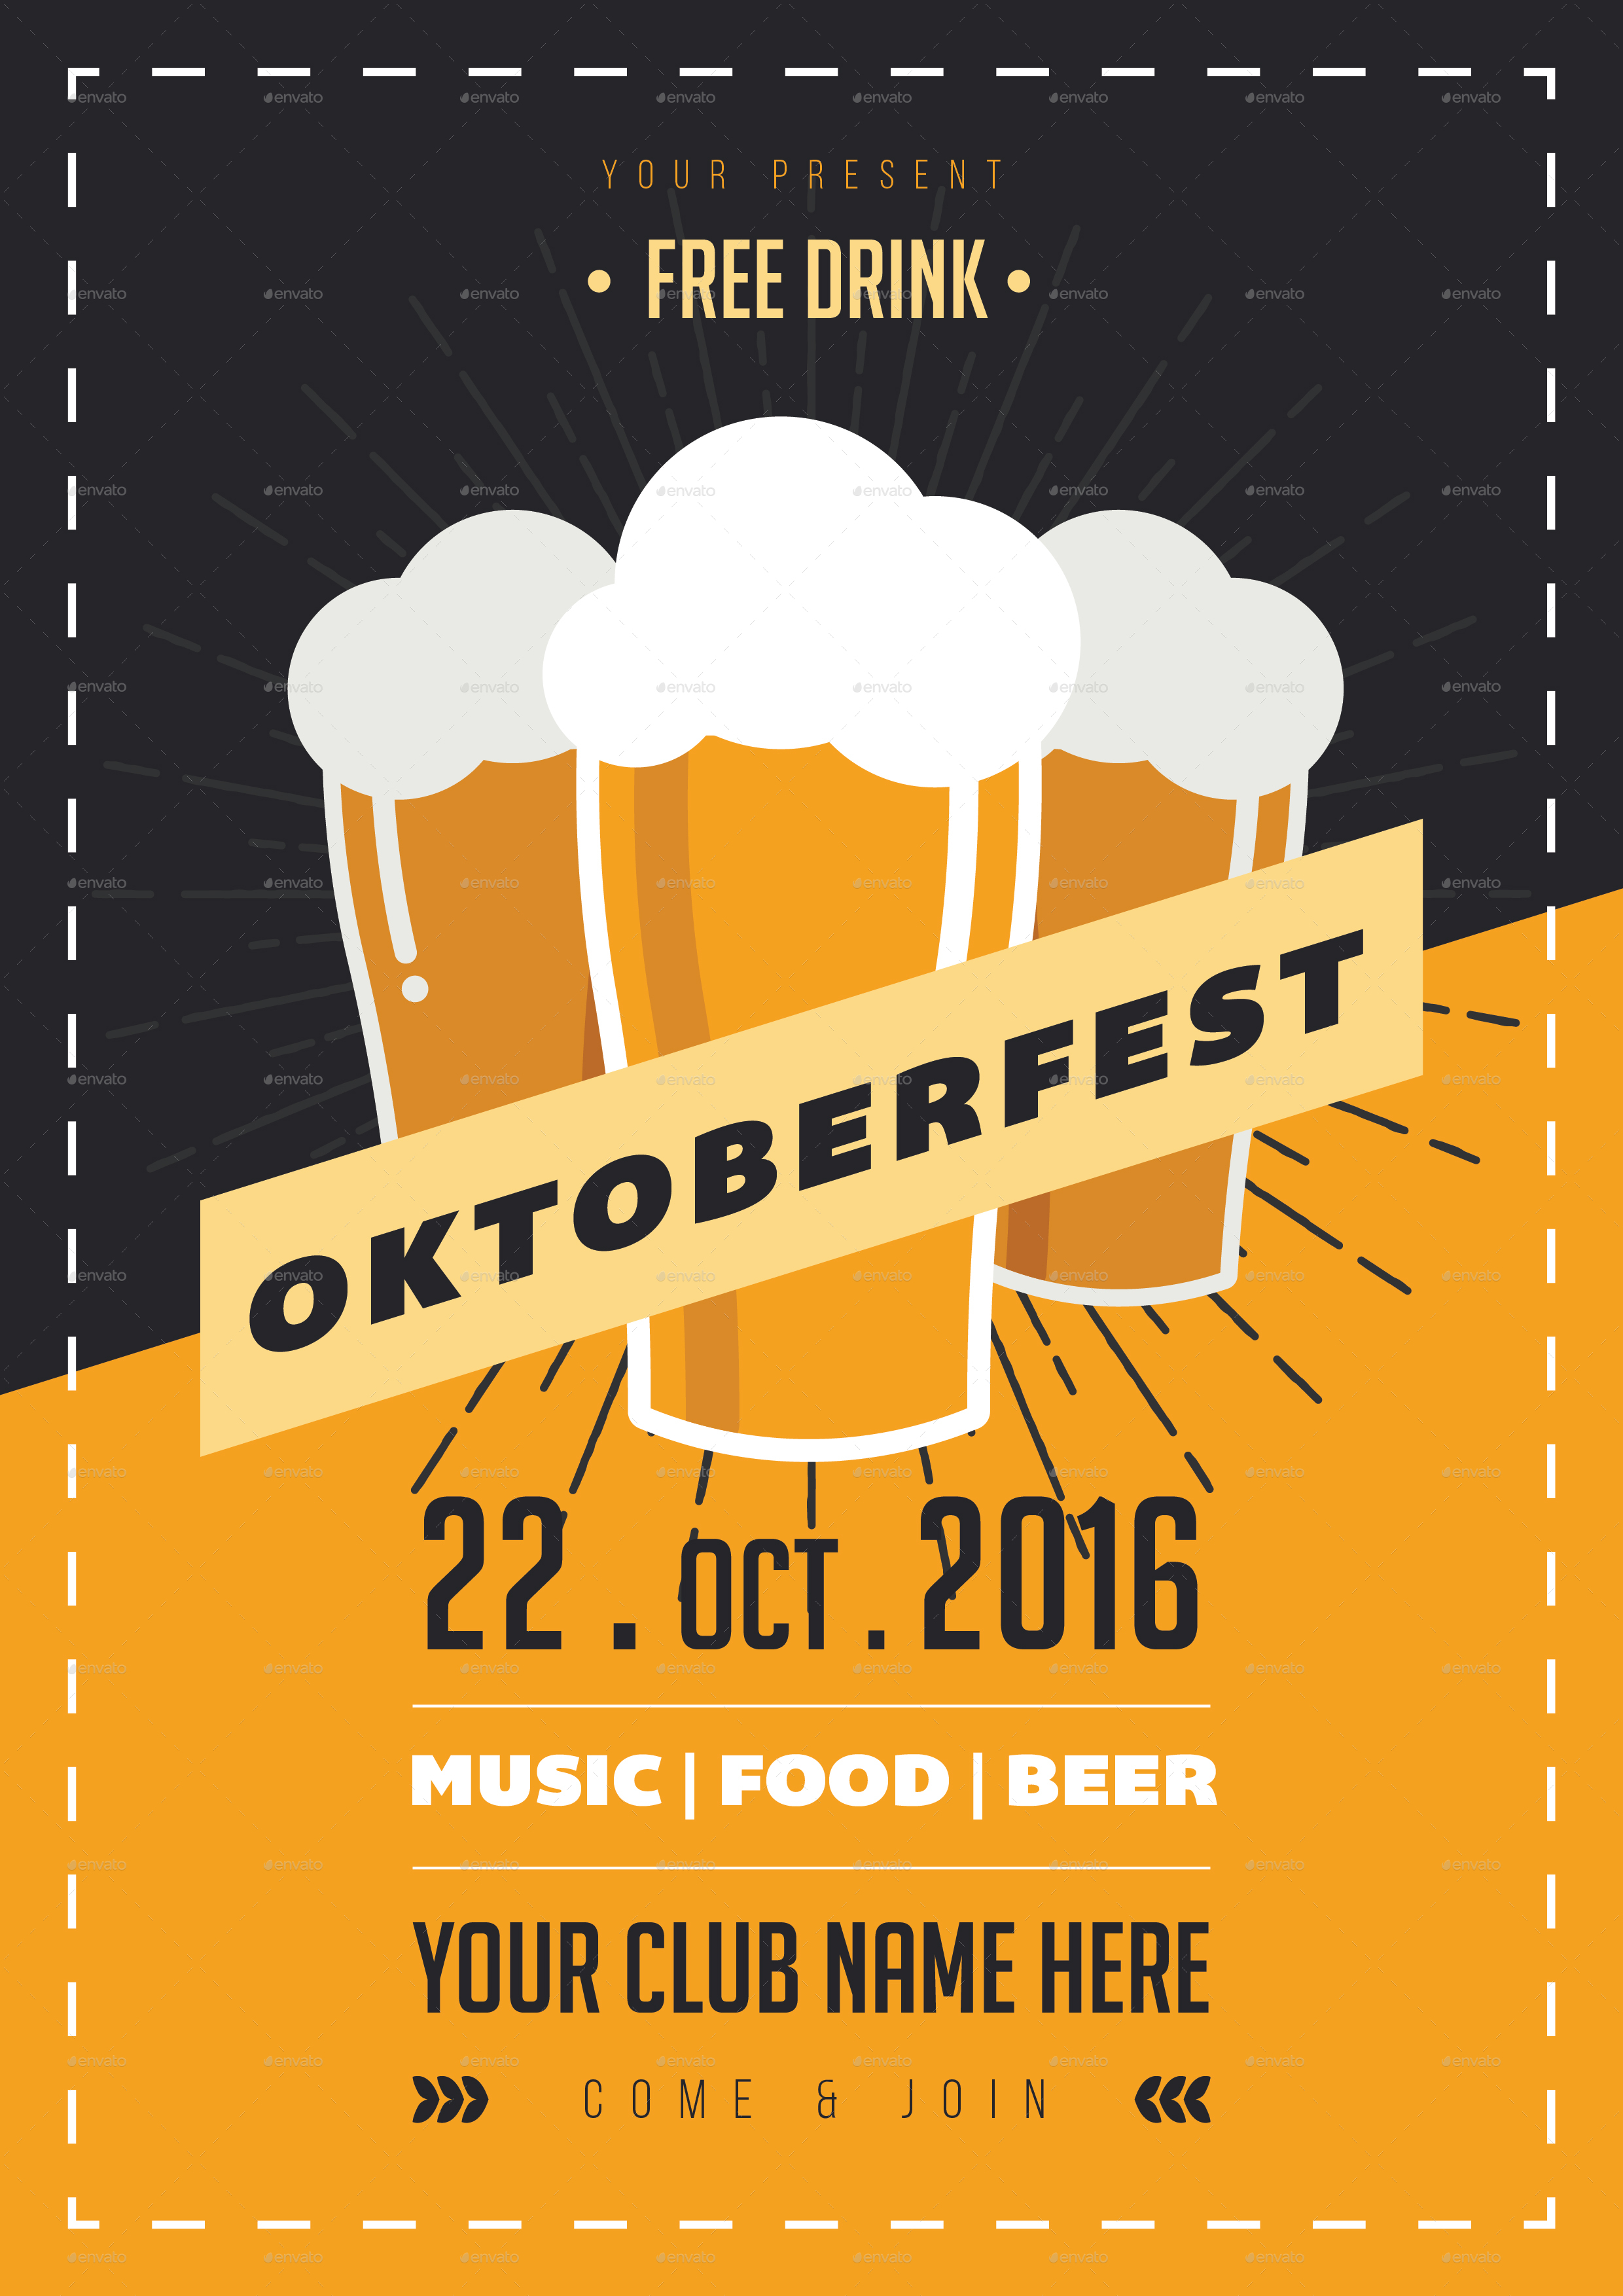 OKTOBERFEST FLYER by ming-ming | GraphicRiver